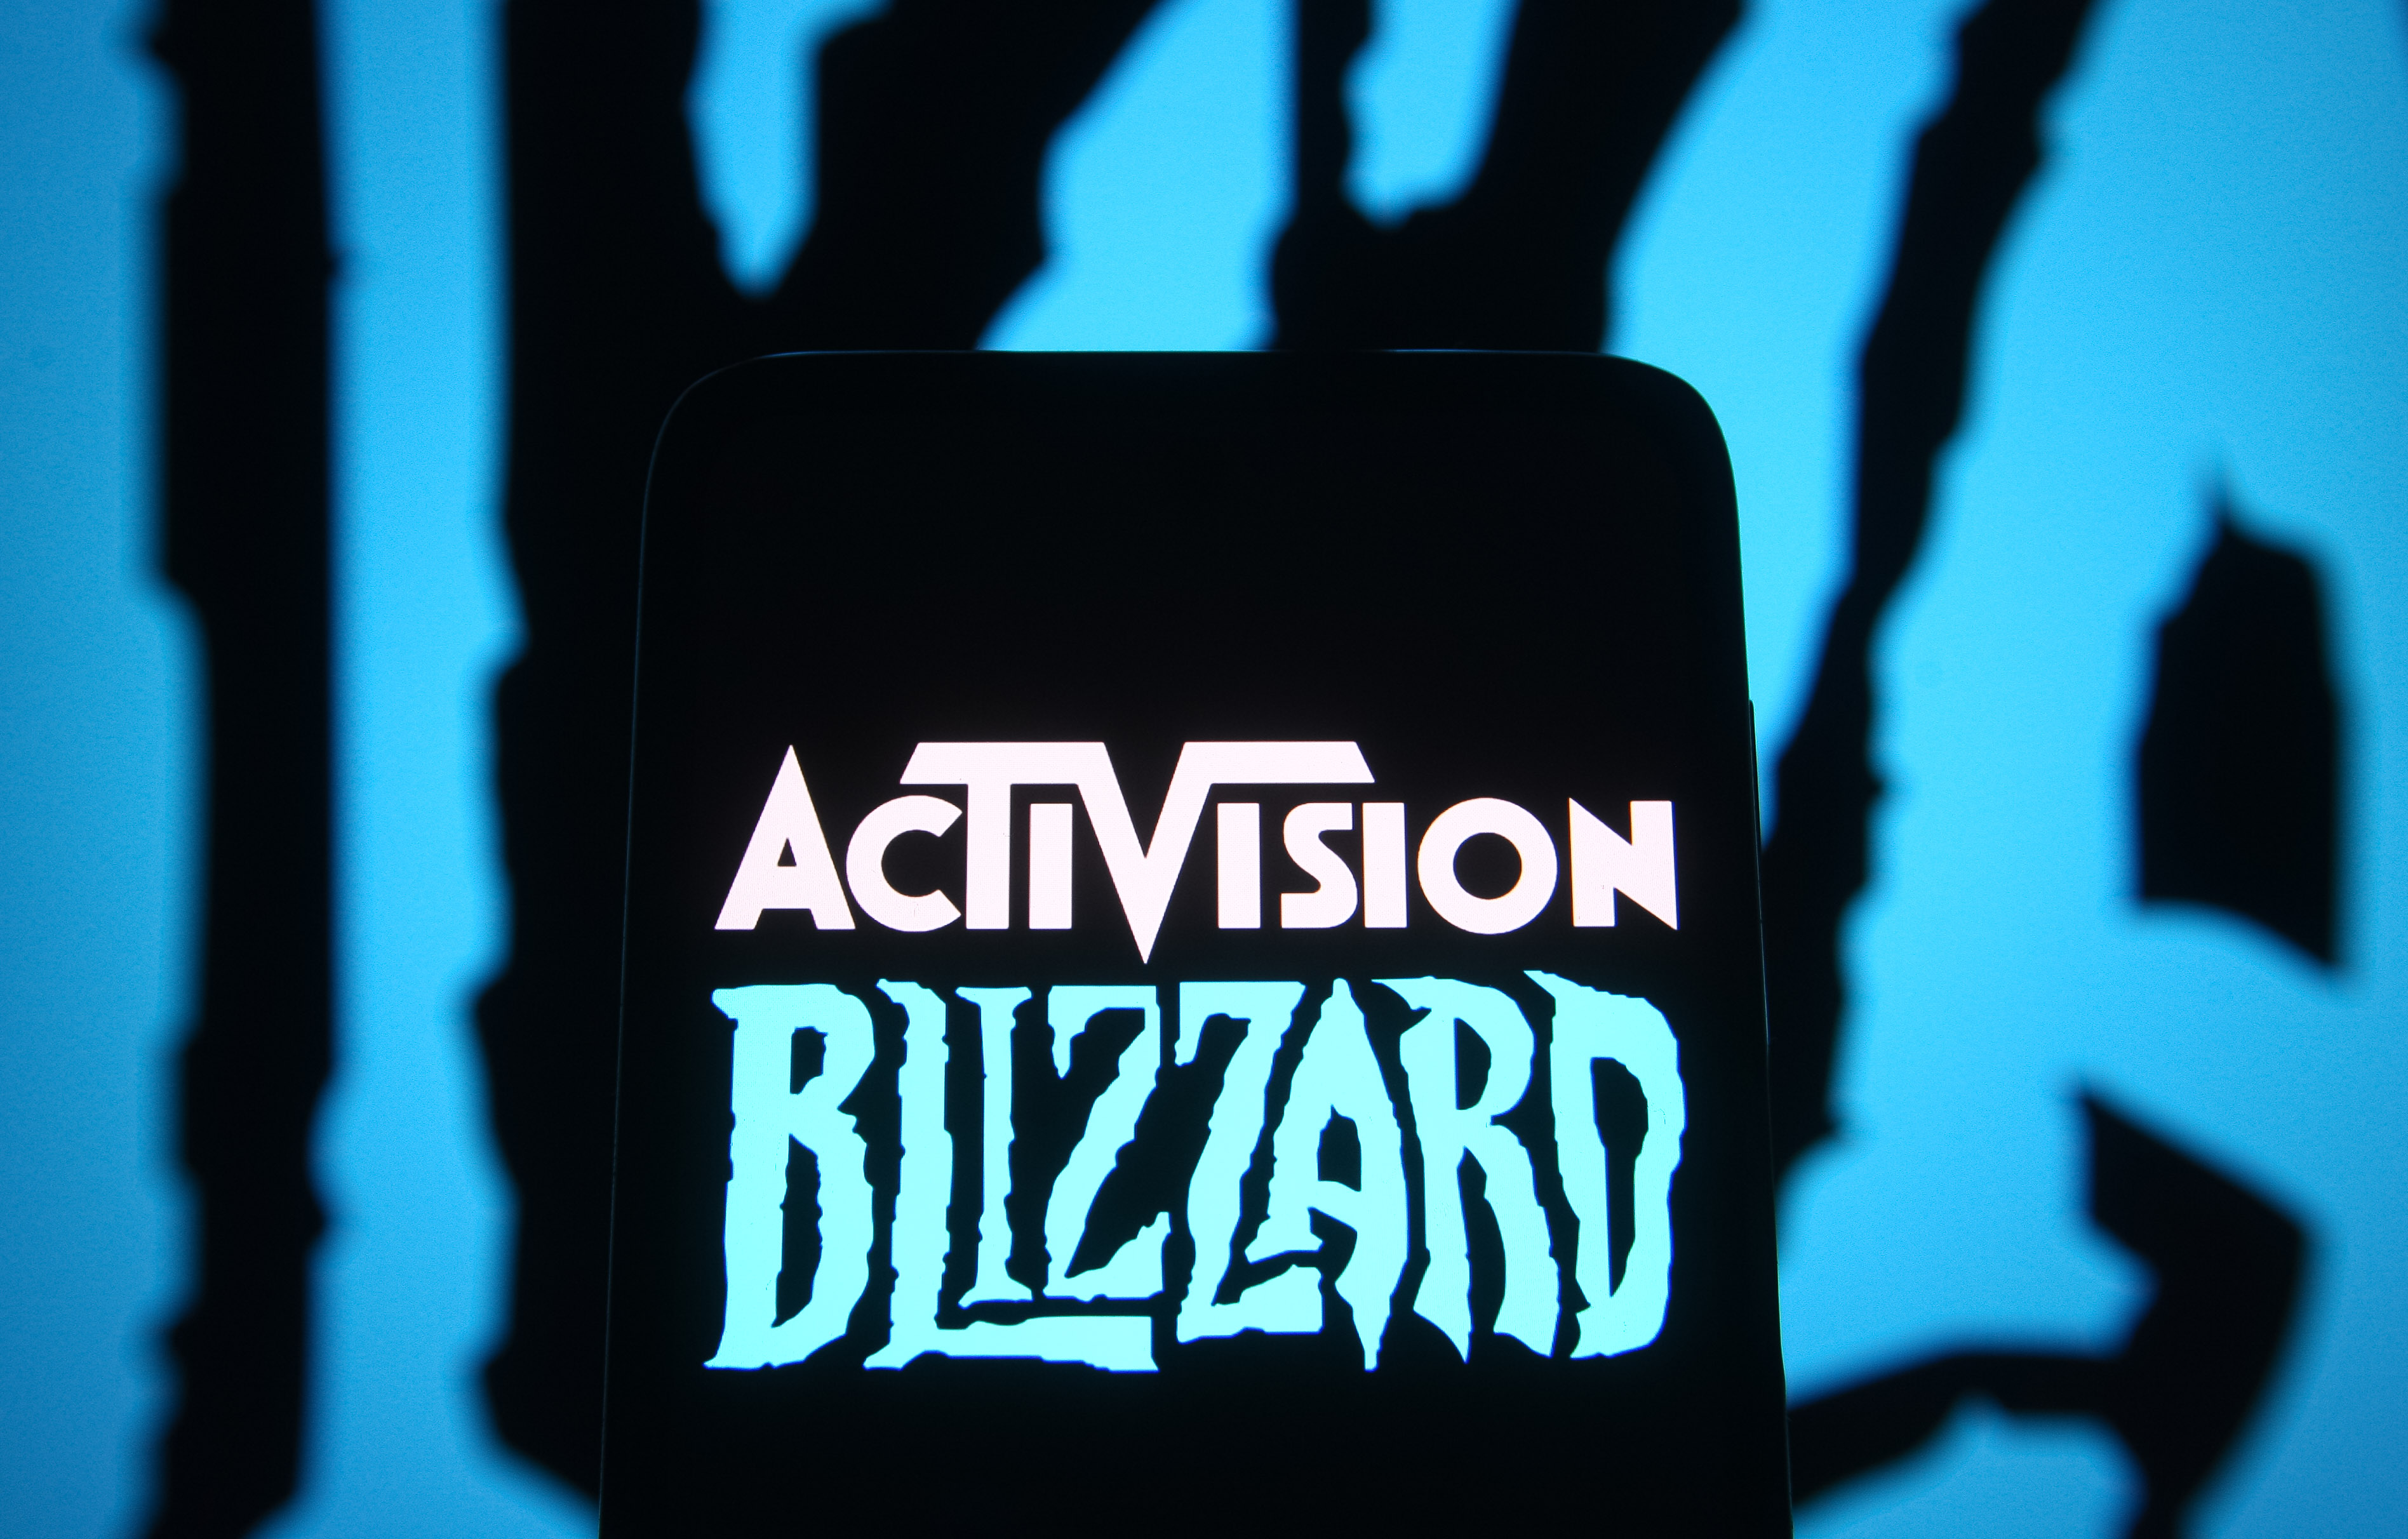 Activision Blizzard will pay $35 million to settle SEC charges over its handling of complaints